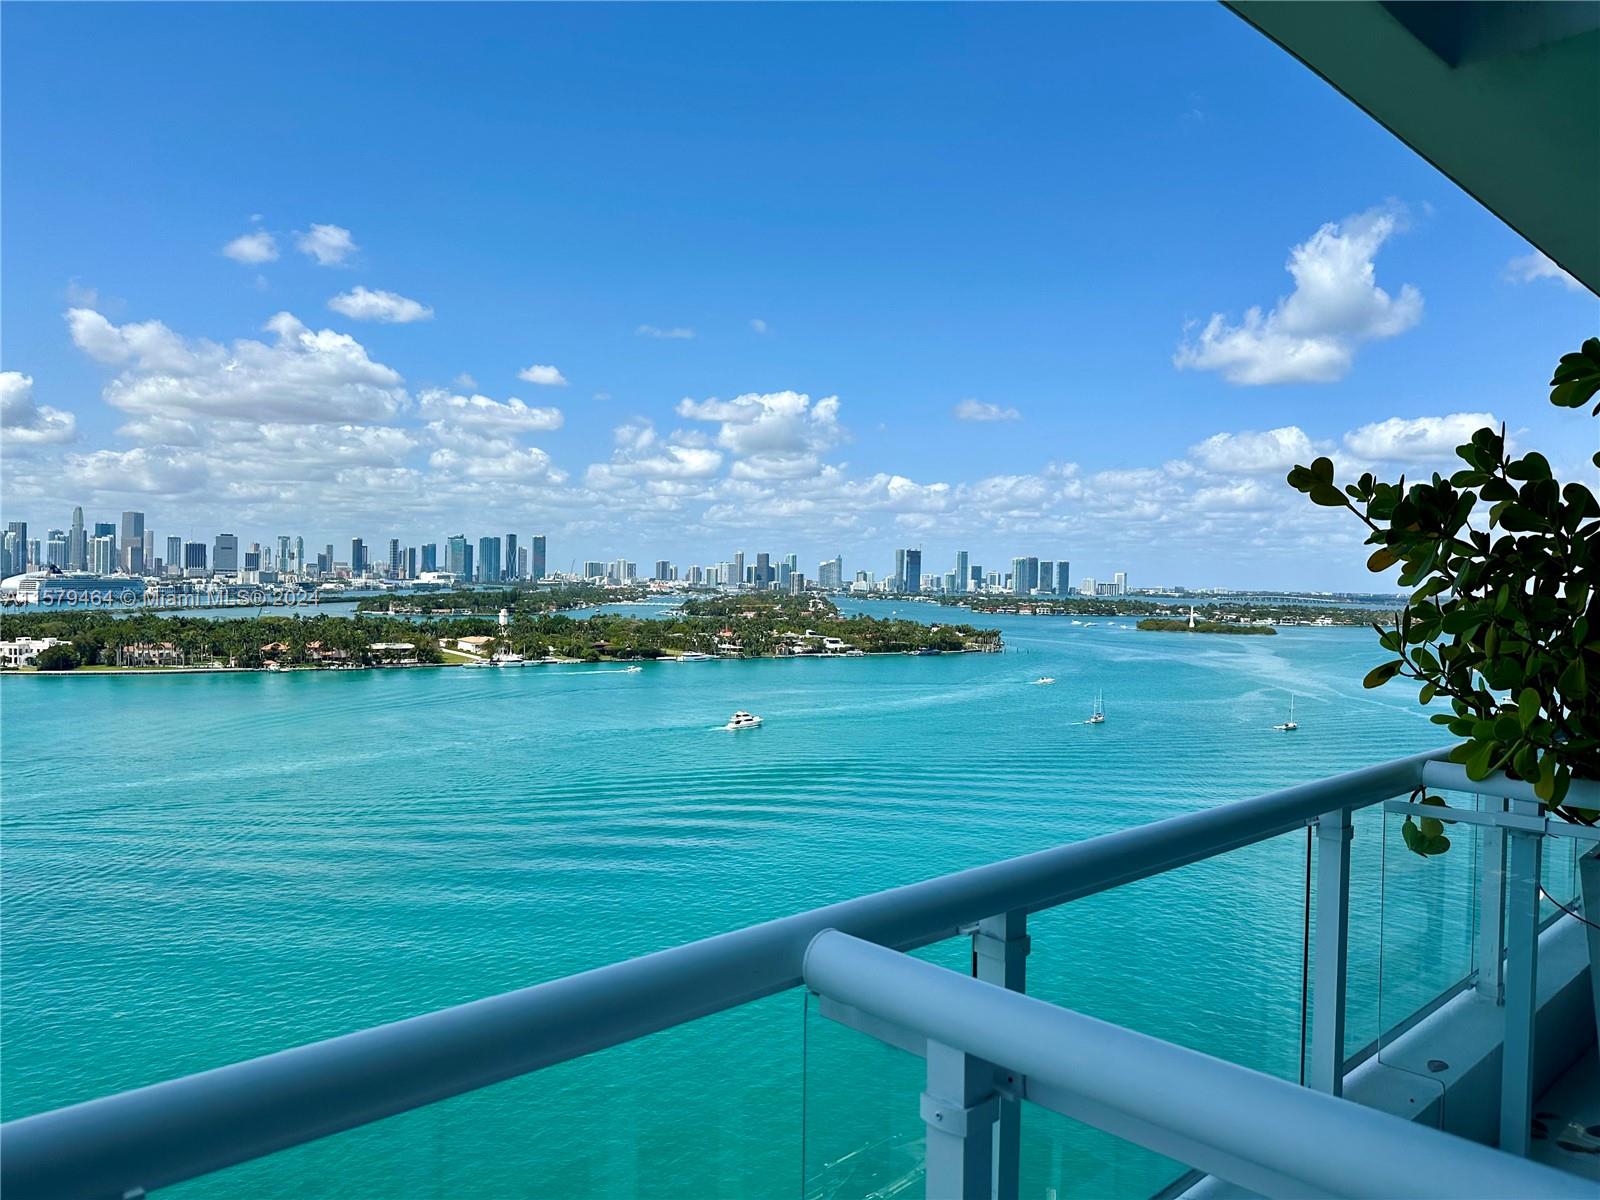 Stunning fully furnished 1 Bedroom apartment with breathtaking sunset and Miami skyline views, in one of the most exclusive buildings in Miami Beach, Bentley Bay.The condo is filled with natural light during the day and displays the most spectacular sunsets at night. The apartment has marble-floors throughout, floor to ceiling windows, and a nice balcony to enjoy a luxurious lifestyle together with the building's 5-star amenities. Move to one of the best locations in South Beach, walking distance from South Pointe Park, The Miami Beach Marina, Whole Foods, Publix, the beaches and the best restaurants in SOBE.